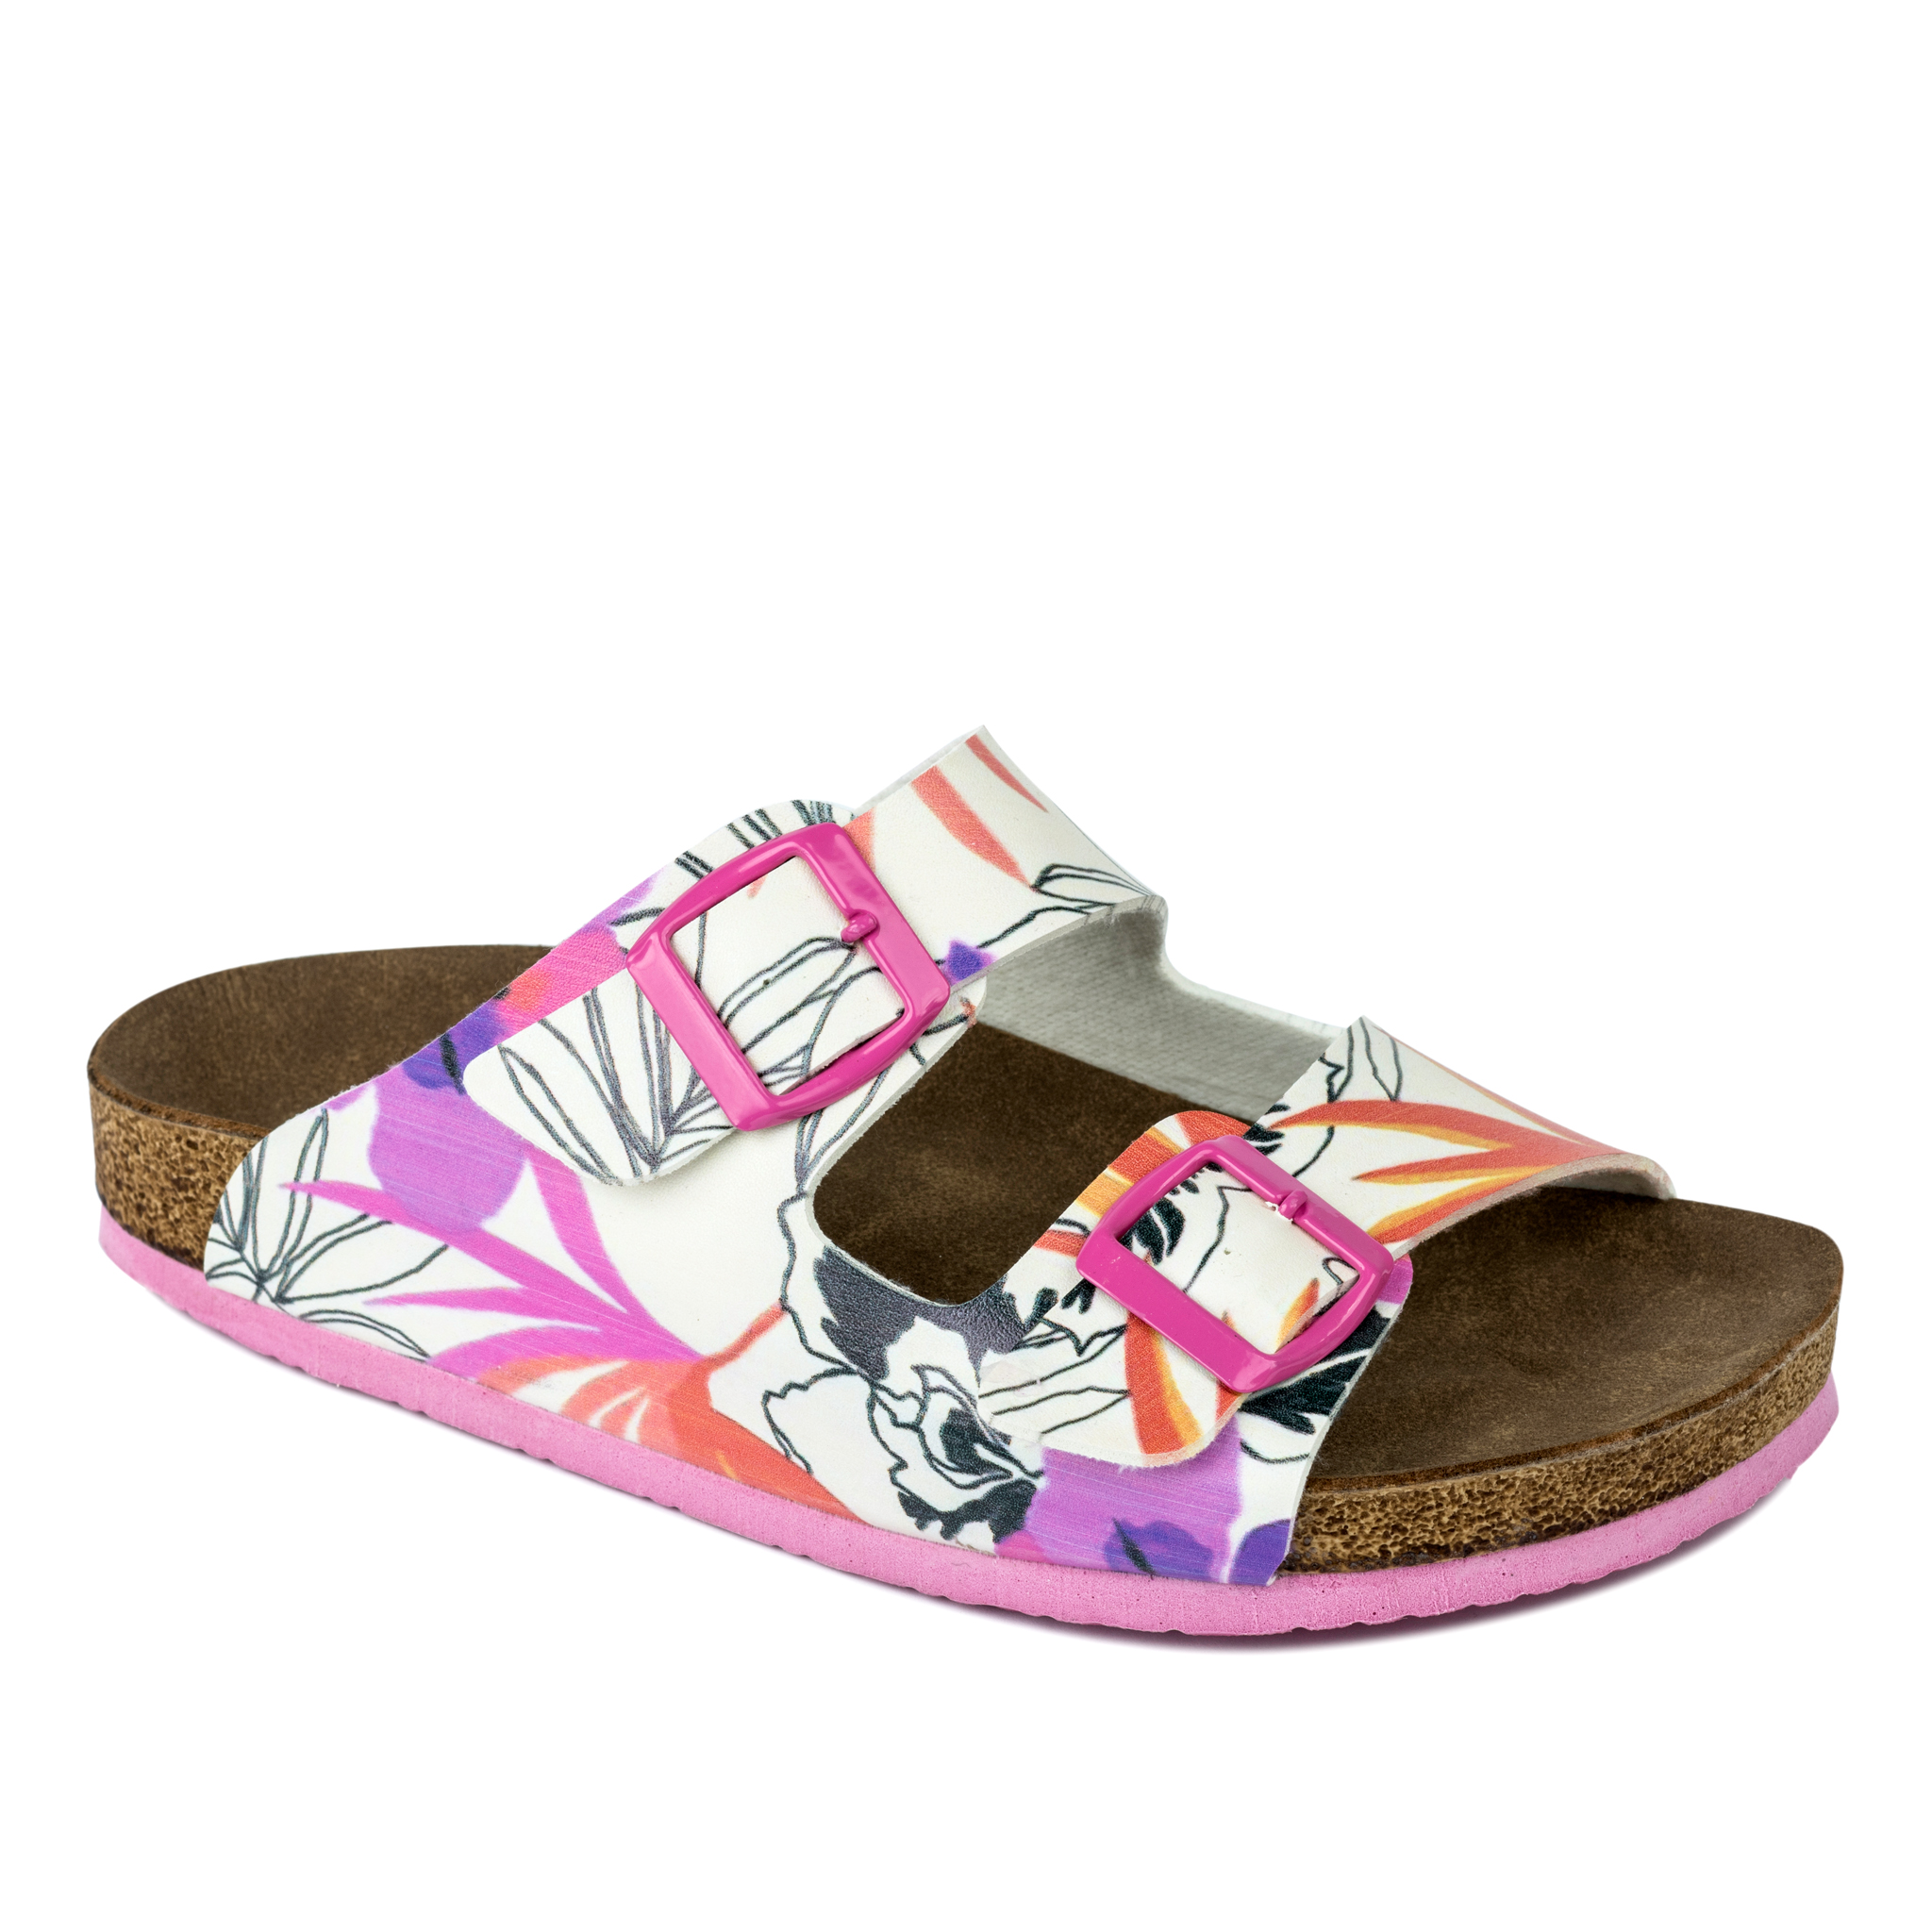 PRINTED SLIPPERS WITH BELTS - WHITE/ROSE